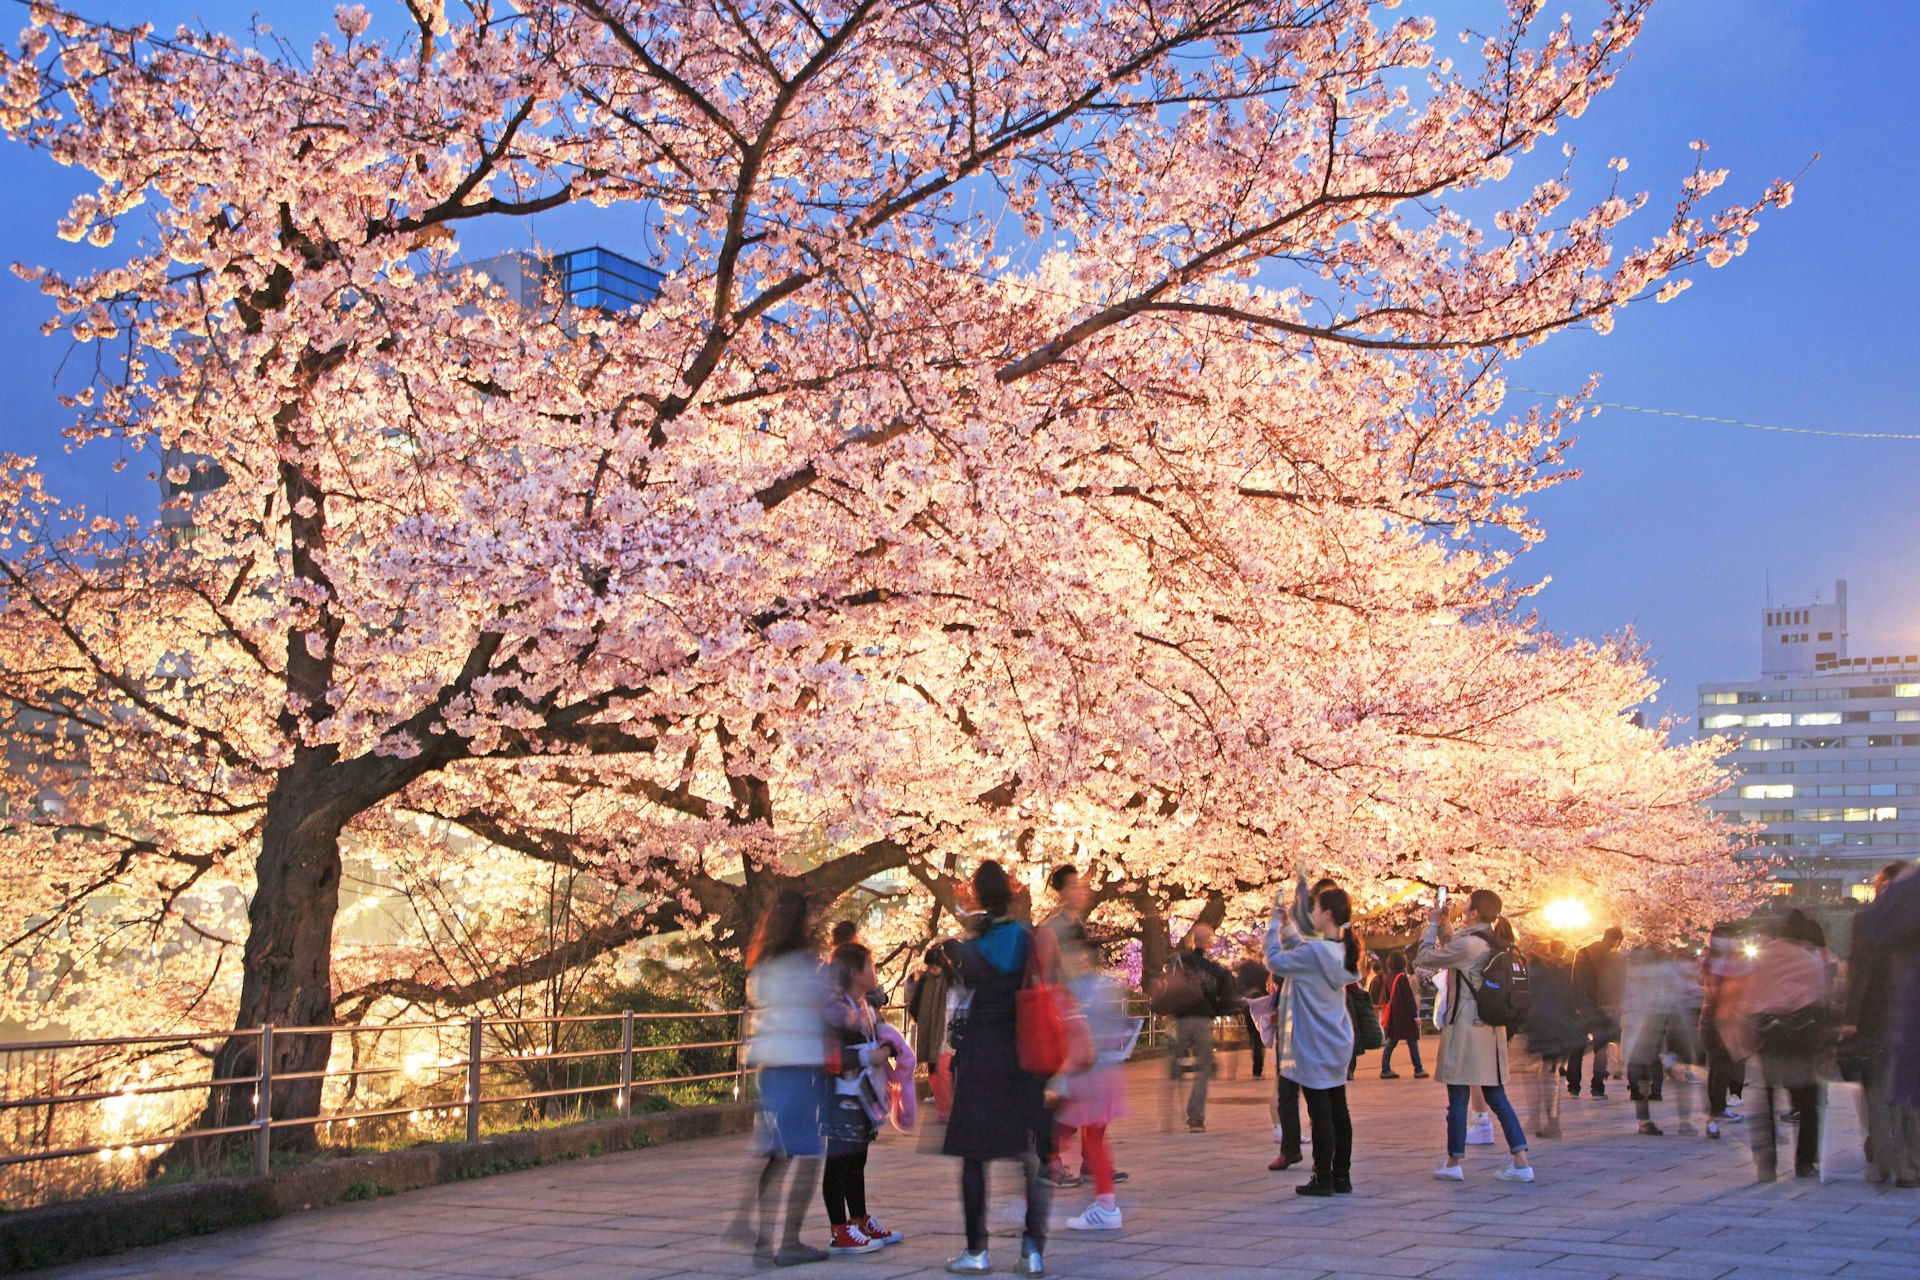 Cherry blossom trees in bloom with people taking photos at dusk